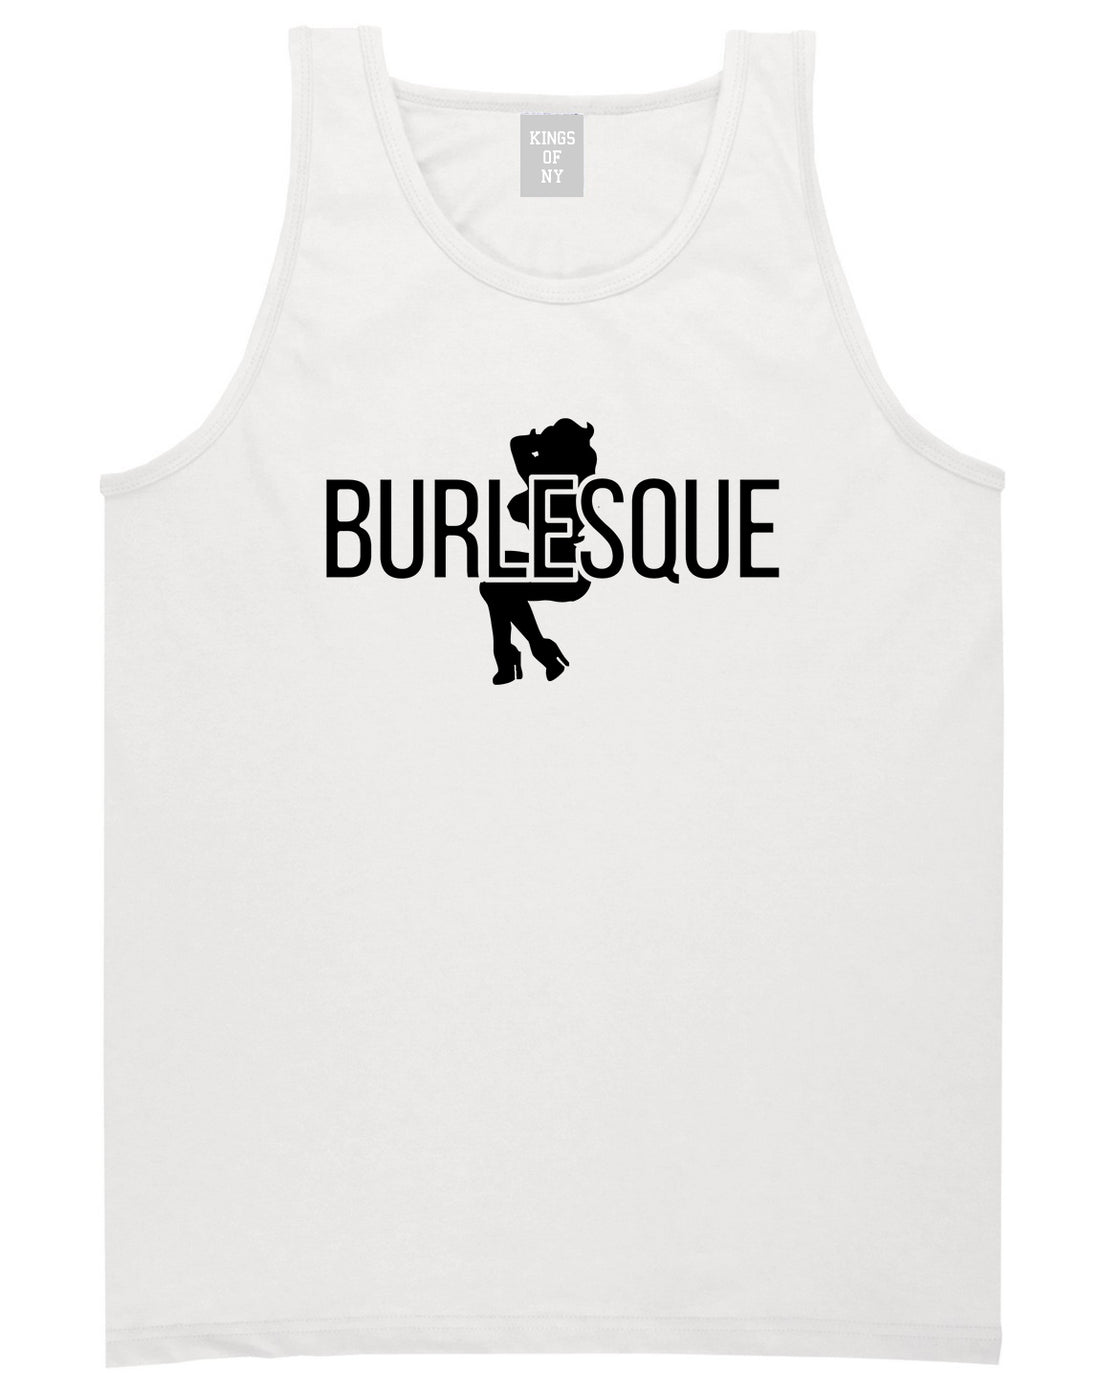 Burlesque Girl White Tank Top Shirt by Kings Of NY